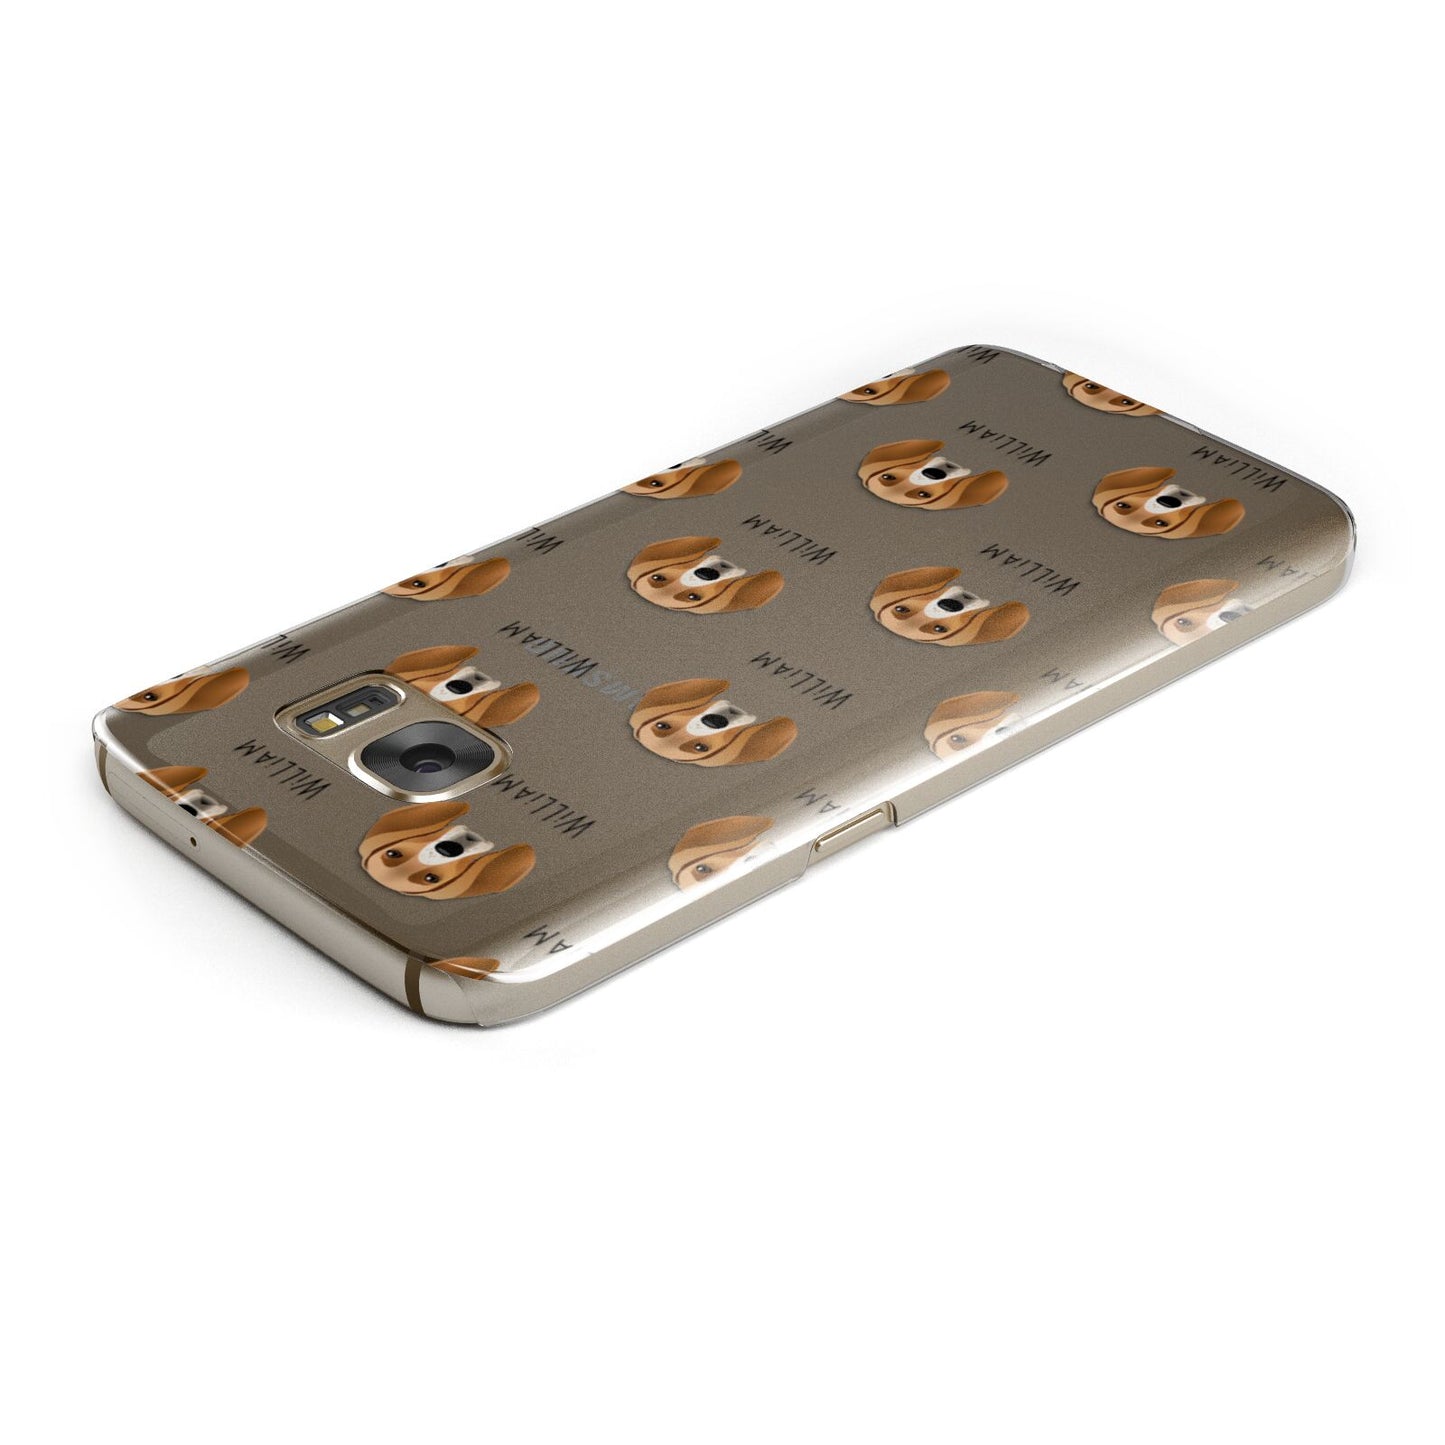 Foxhound Icon with Name Samsung Galaxy Case Top Cutout